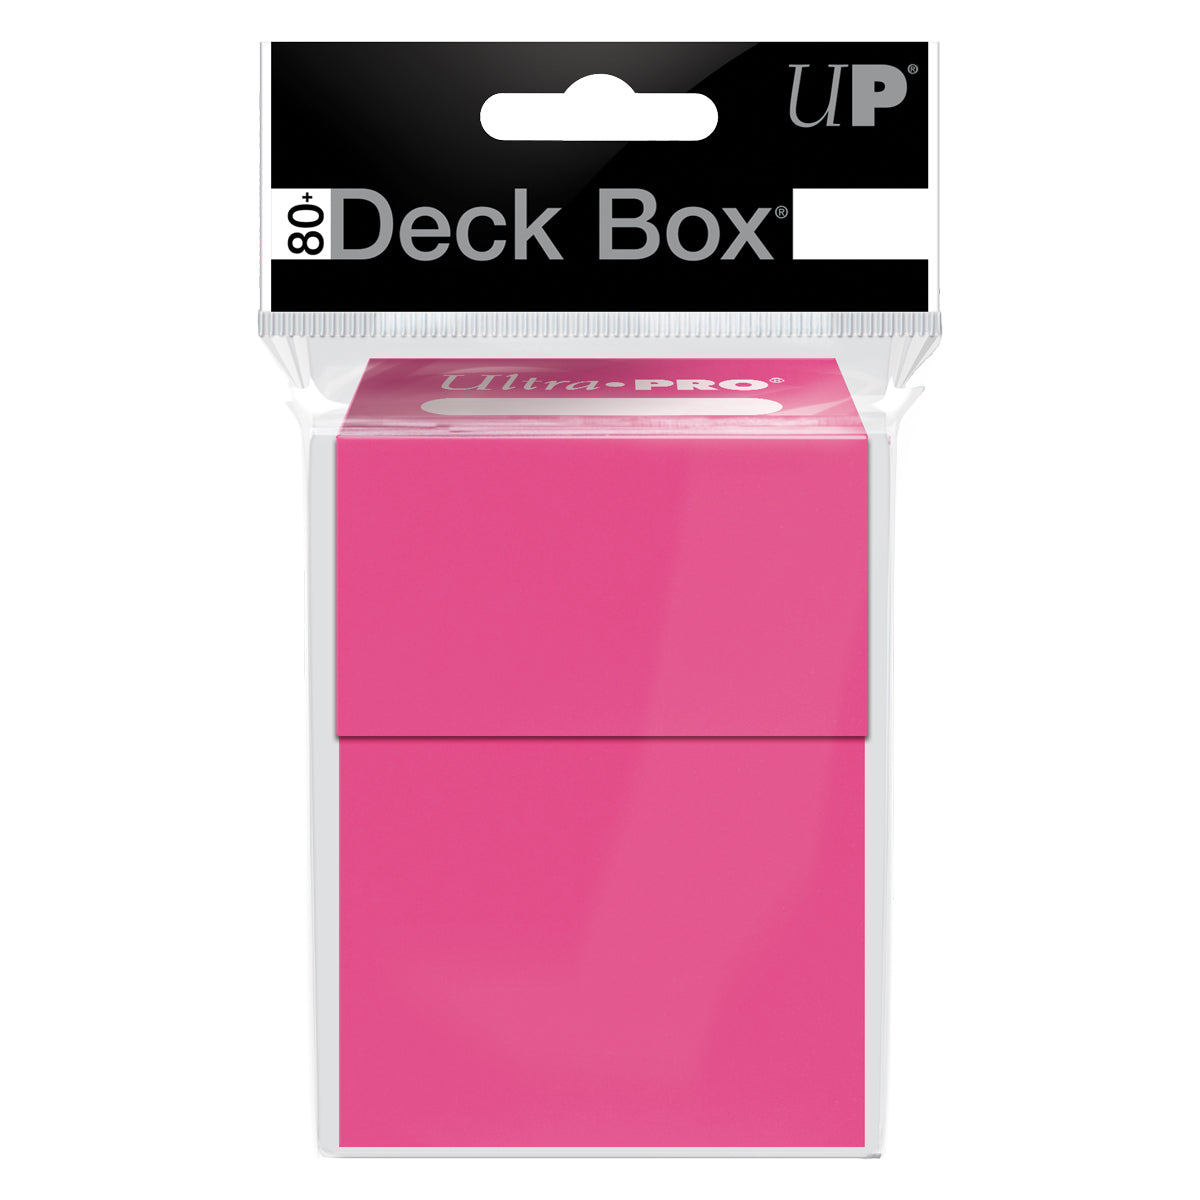 Ultra PRO Deck Box 80+ Eclipse Solid Color - Bright Pink